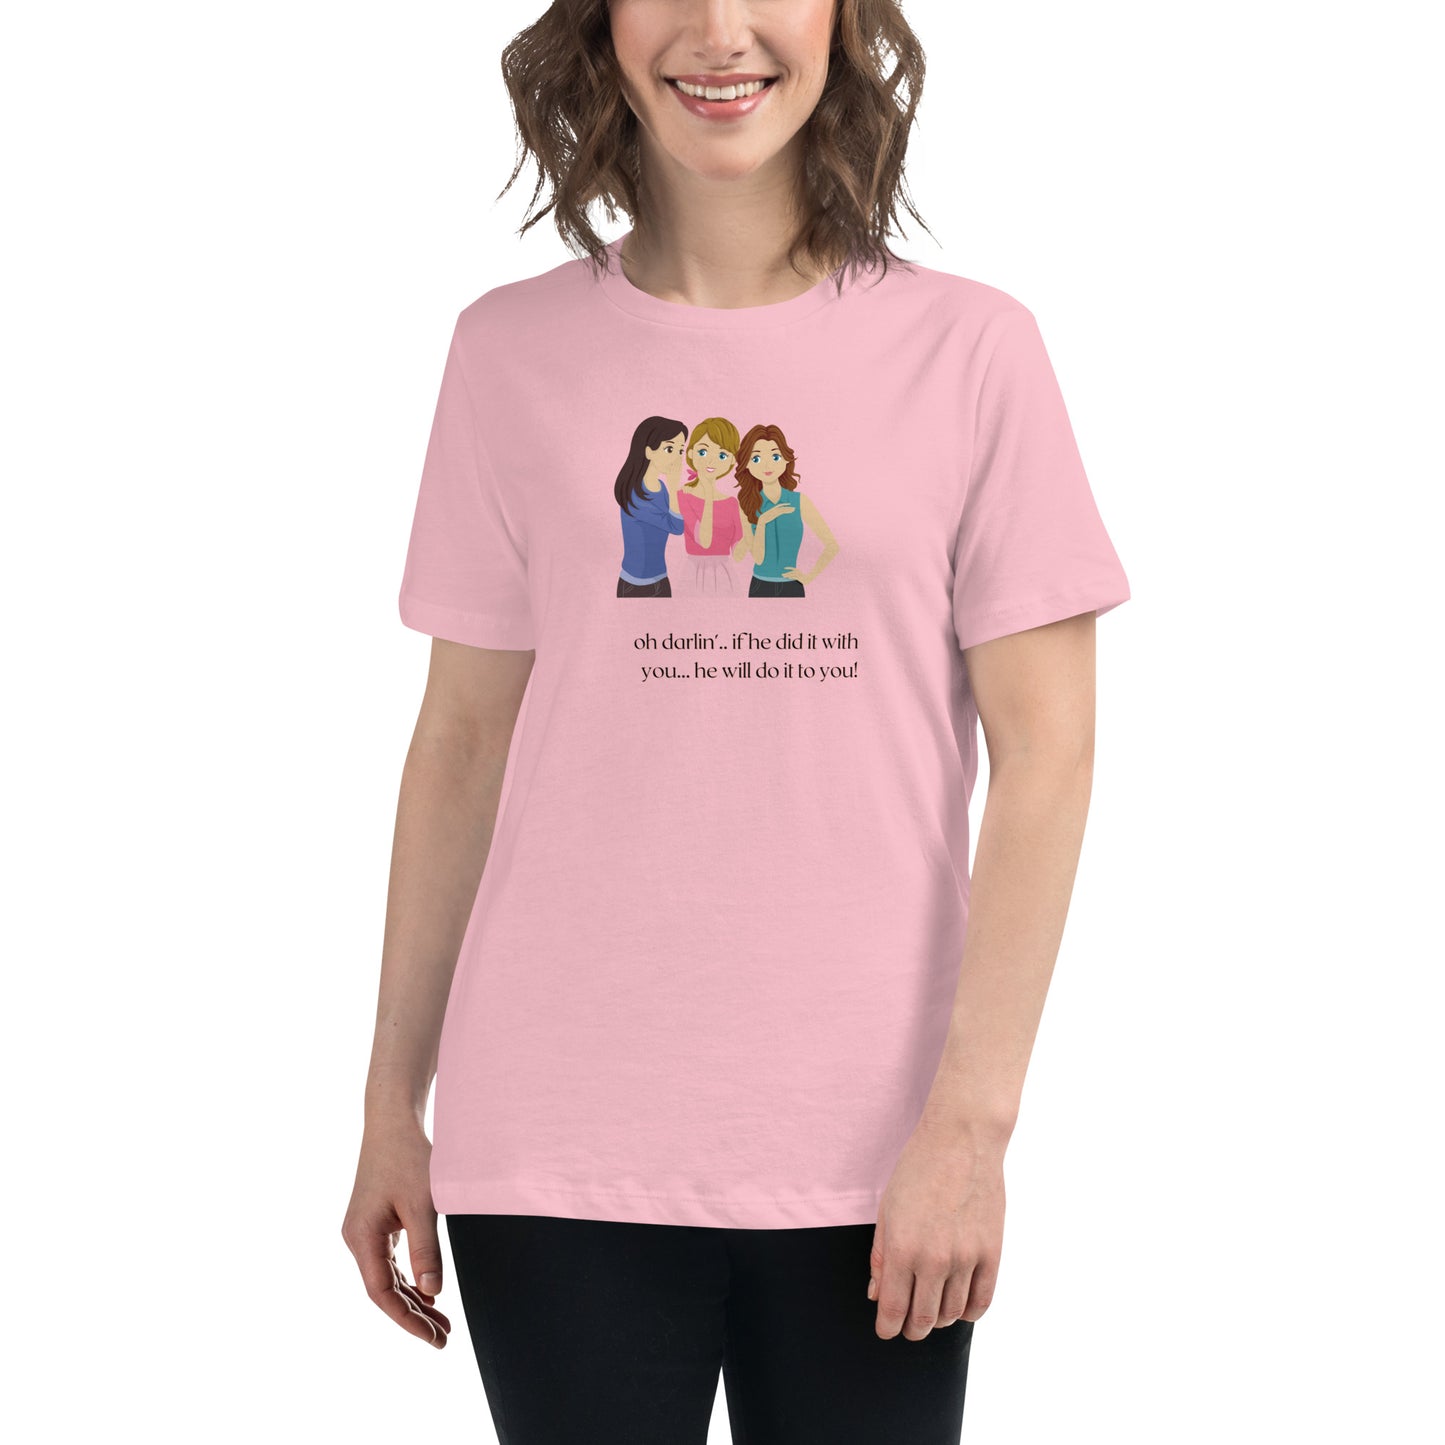 Women's Relaxed T-Shirt - If he Ladies - If He did it with You He'll Do it To You T-shirt Stylin' Spirit Pink S 